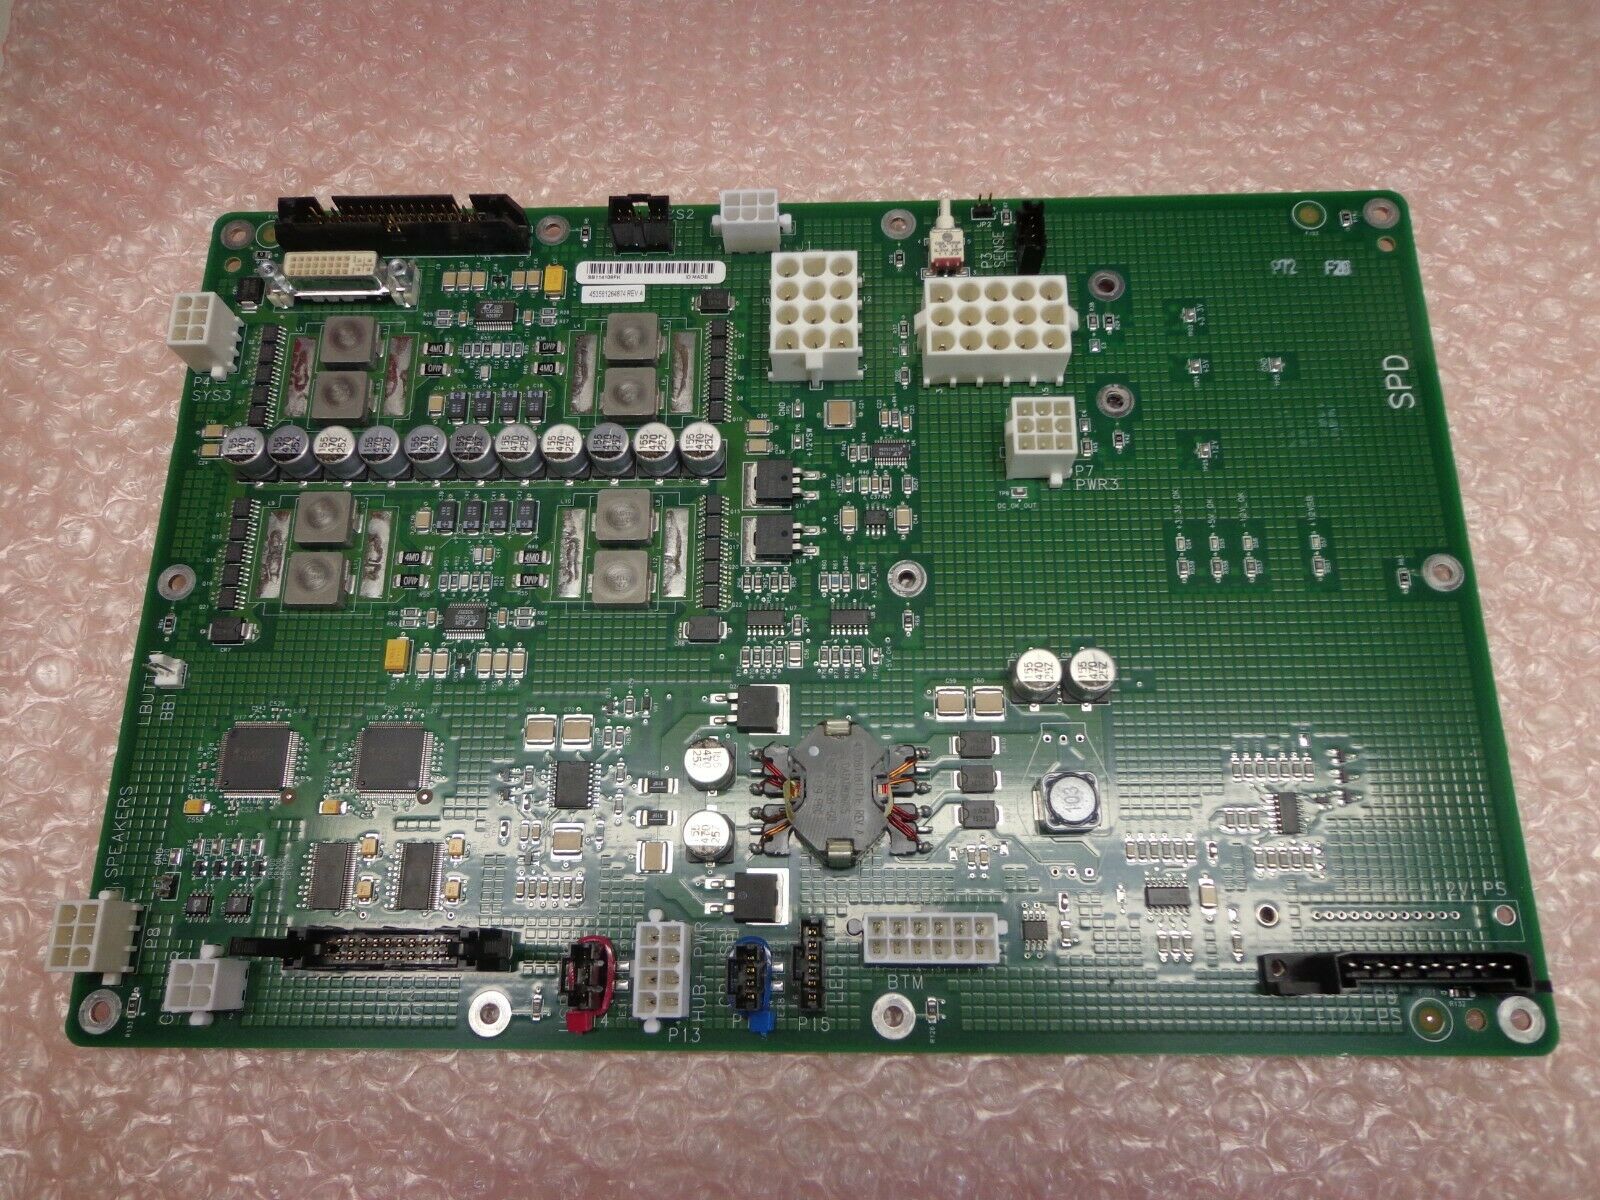 Philips IE33 SPD Board for G.1 Cart Ultrasound System 453561264874 REV A DIAGNOSTIC ULTRASOUND MACHINES FOR SALE